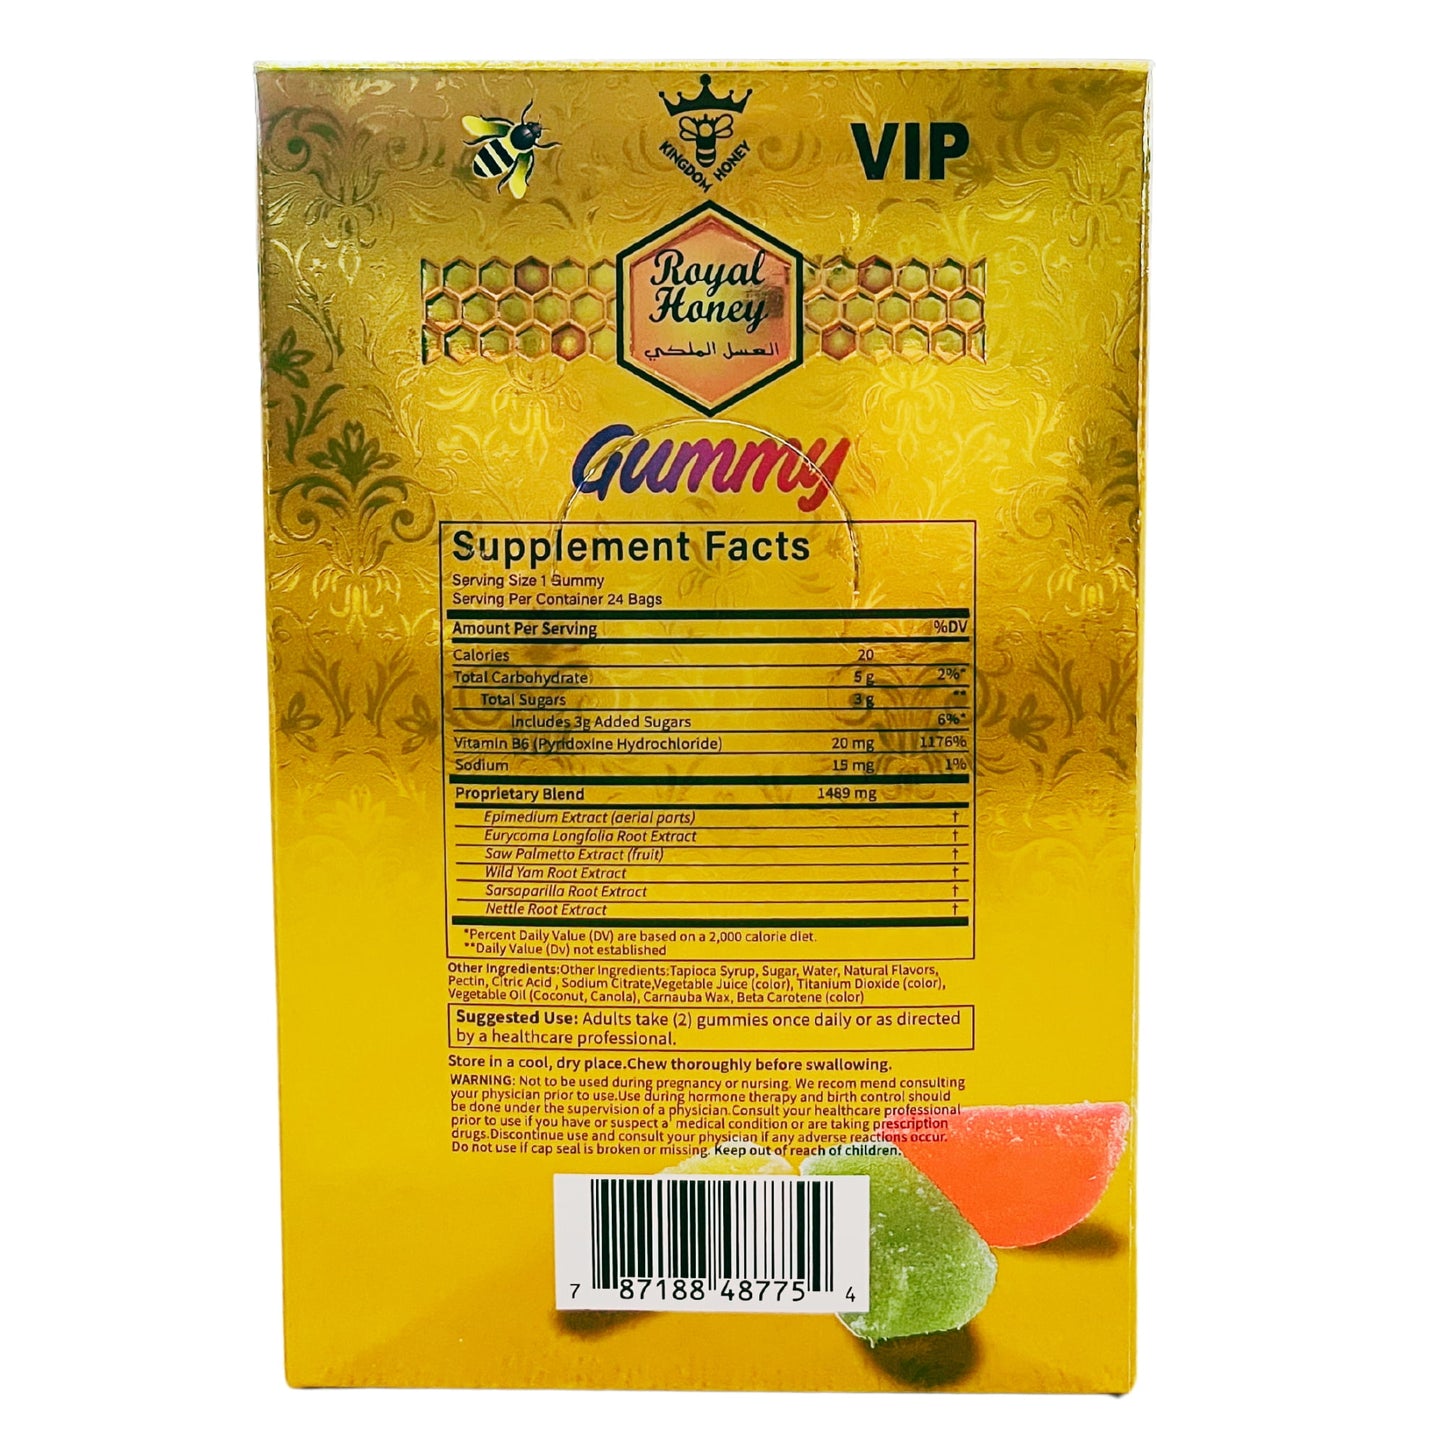 R0YAL KINGDOM V I P Gummy, THE UITIMATE P0WER S0URCE, Serving (7.5g - 2 Pcs) |Pack of 24 Bags